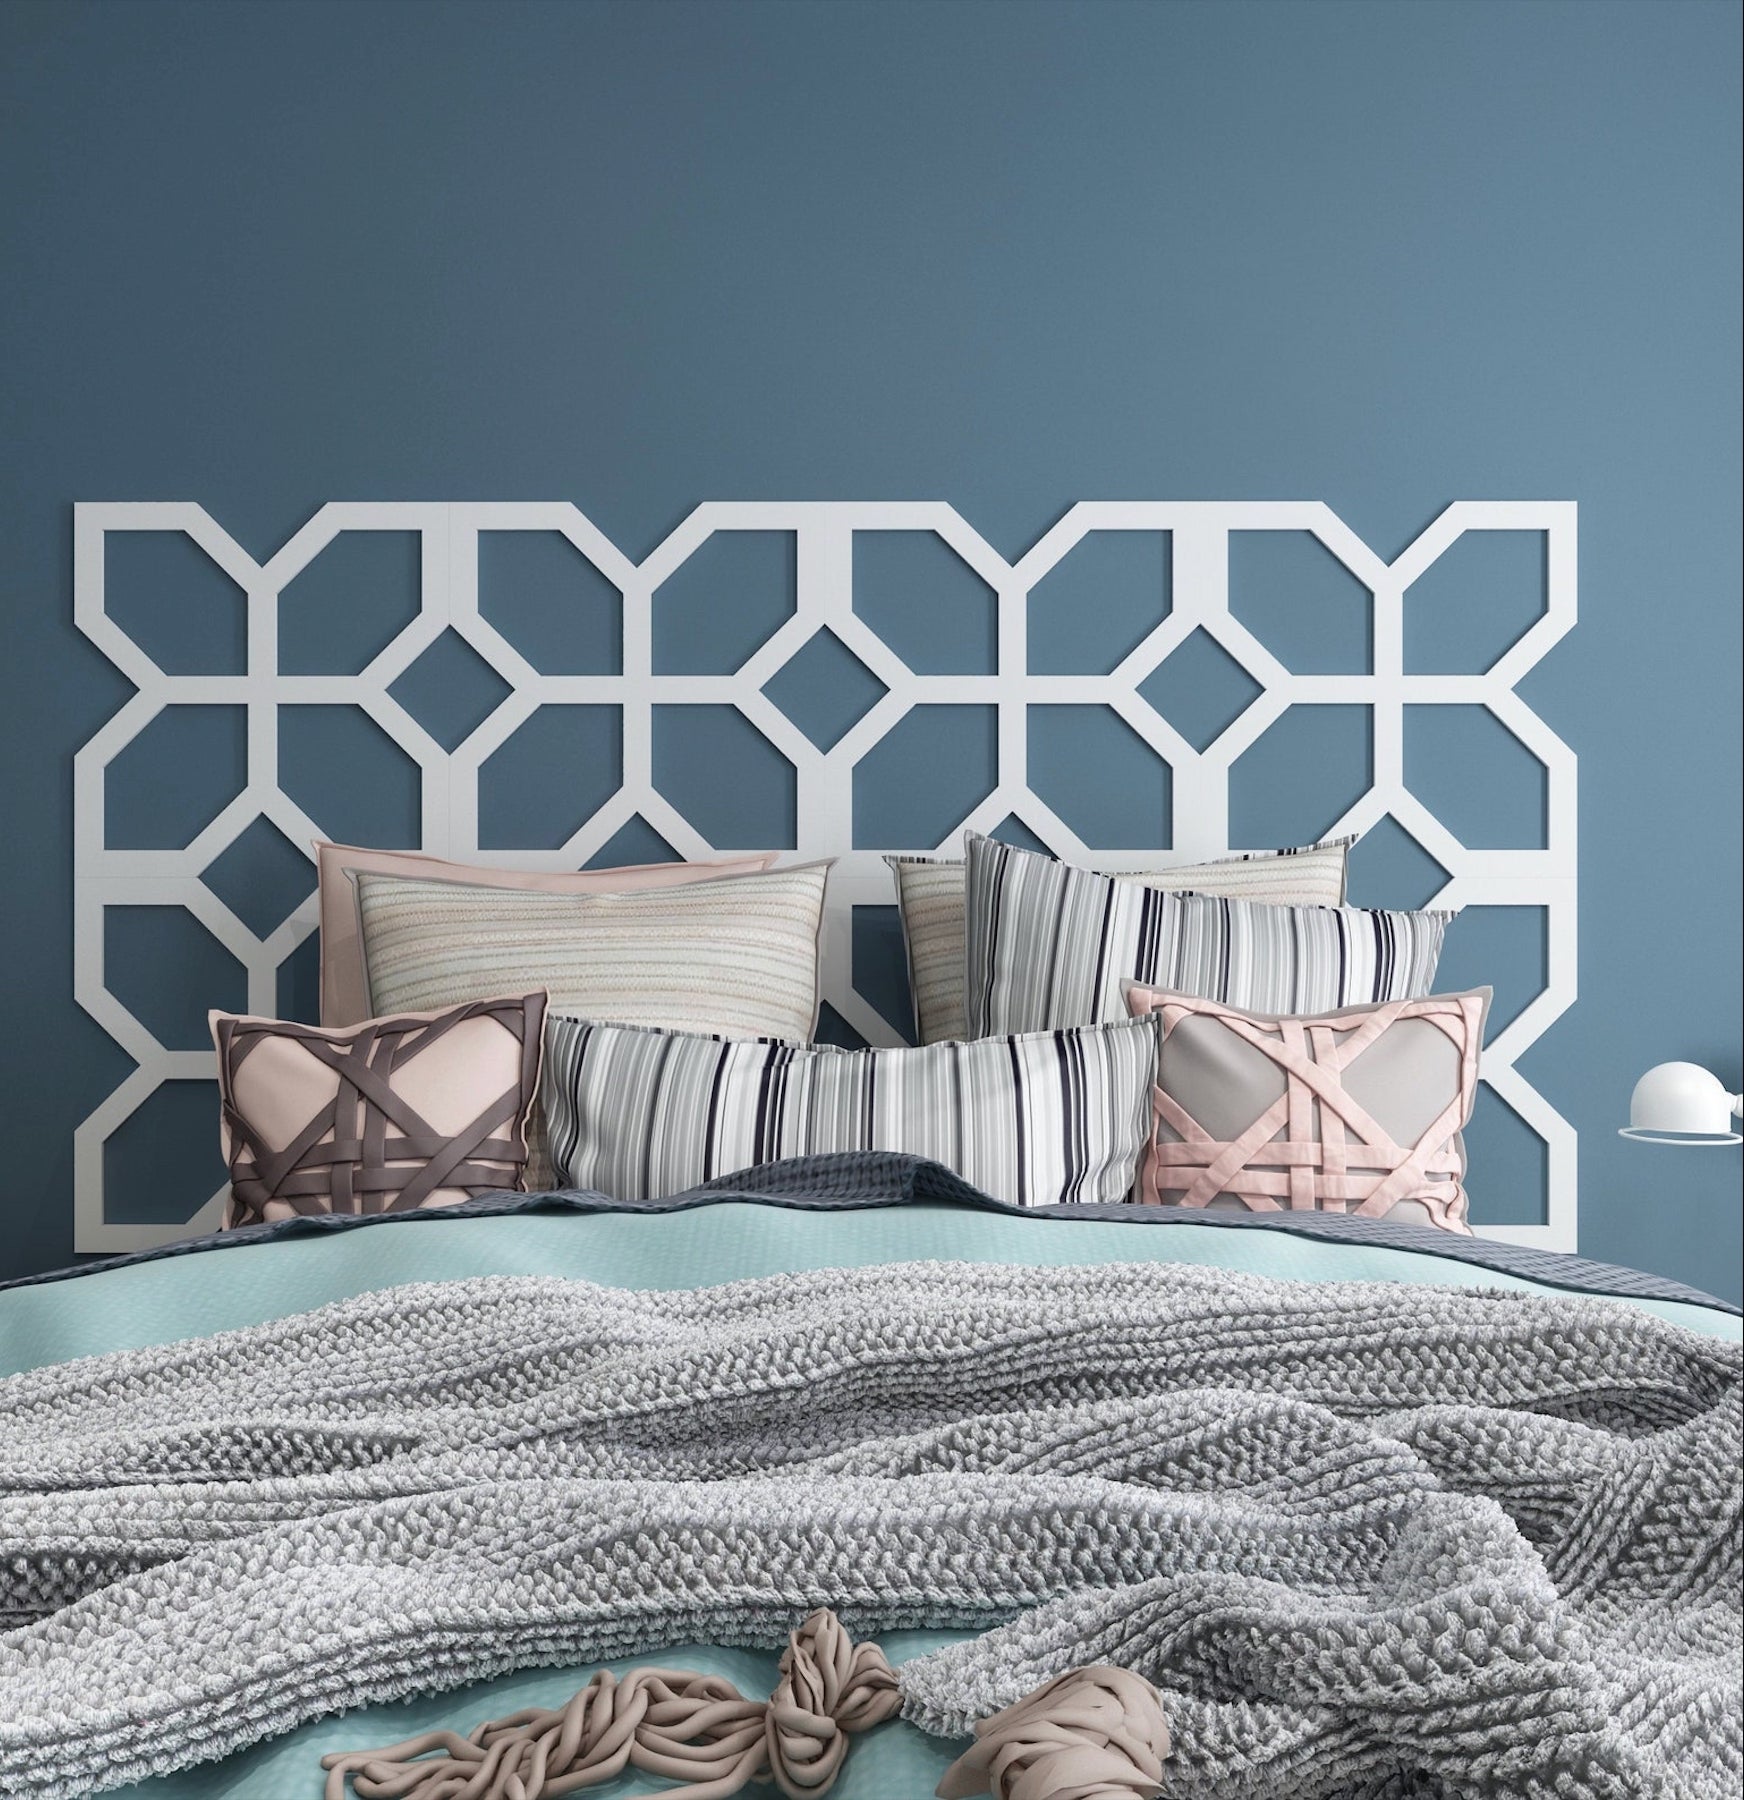 A white geometric decal in a trellis-like design serves as a headboard for a bed with gray and pink textured pillows and gray and aqua, very soft bedding.